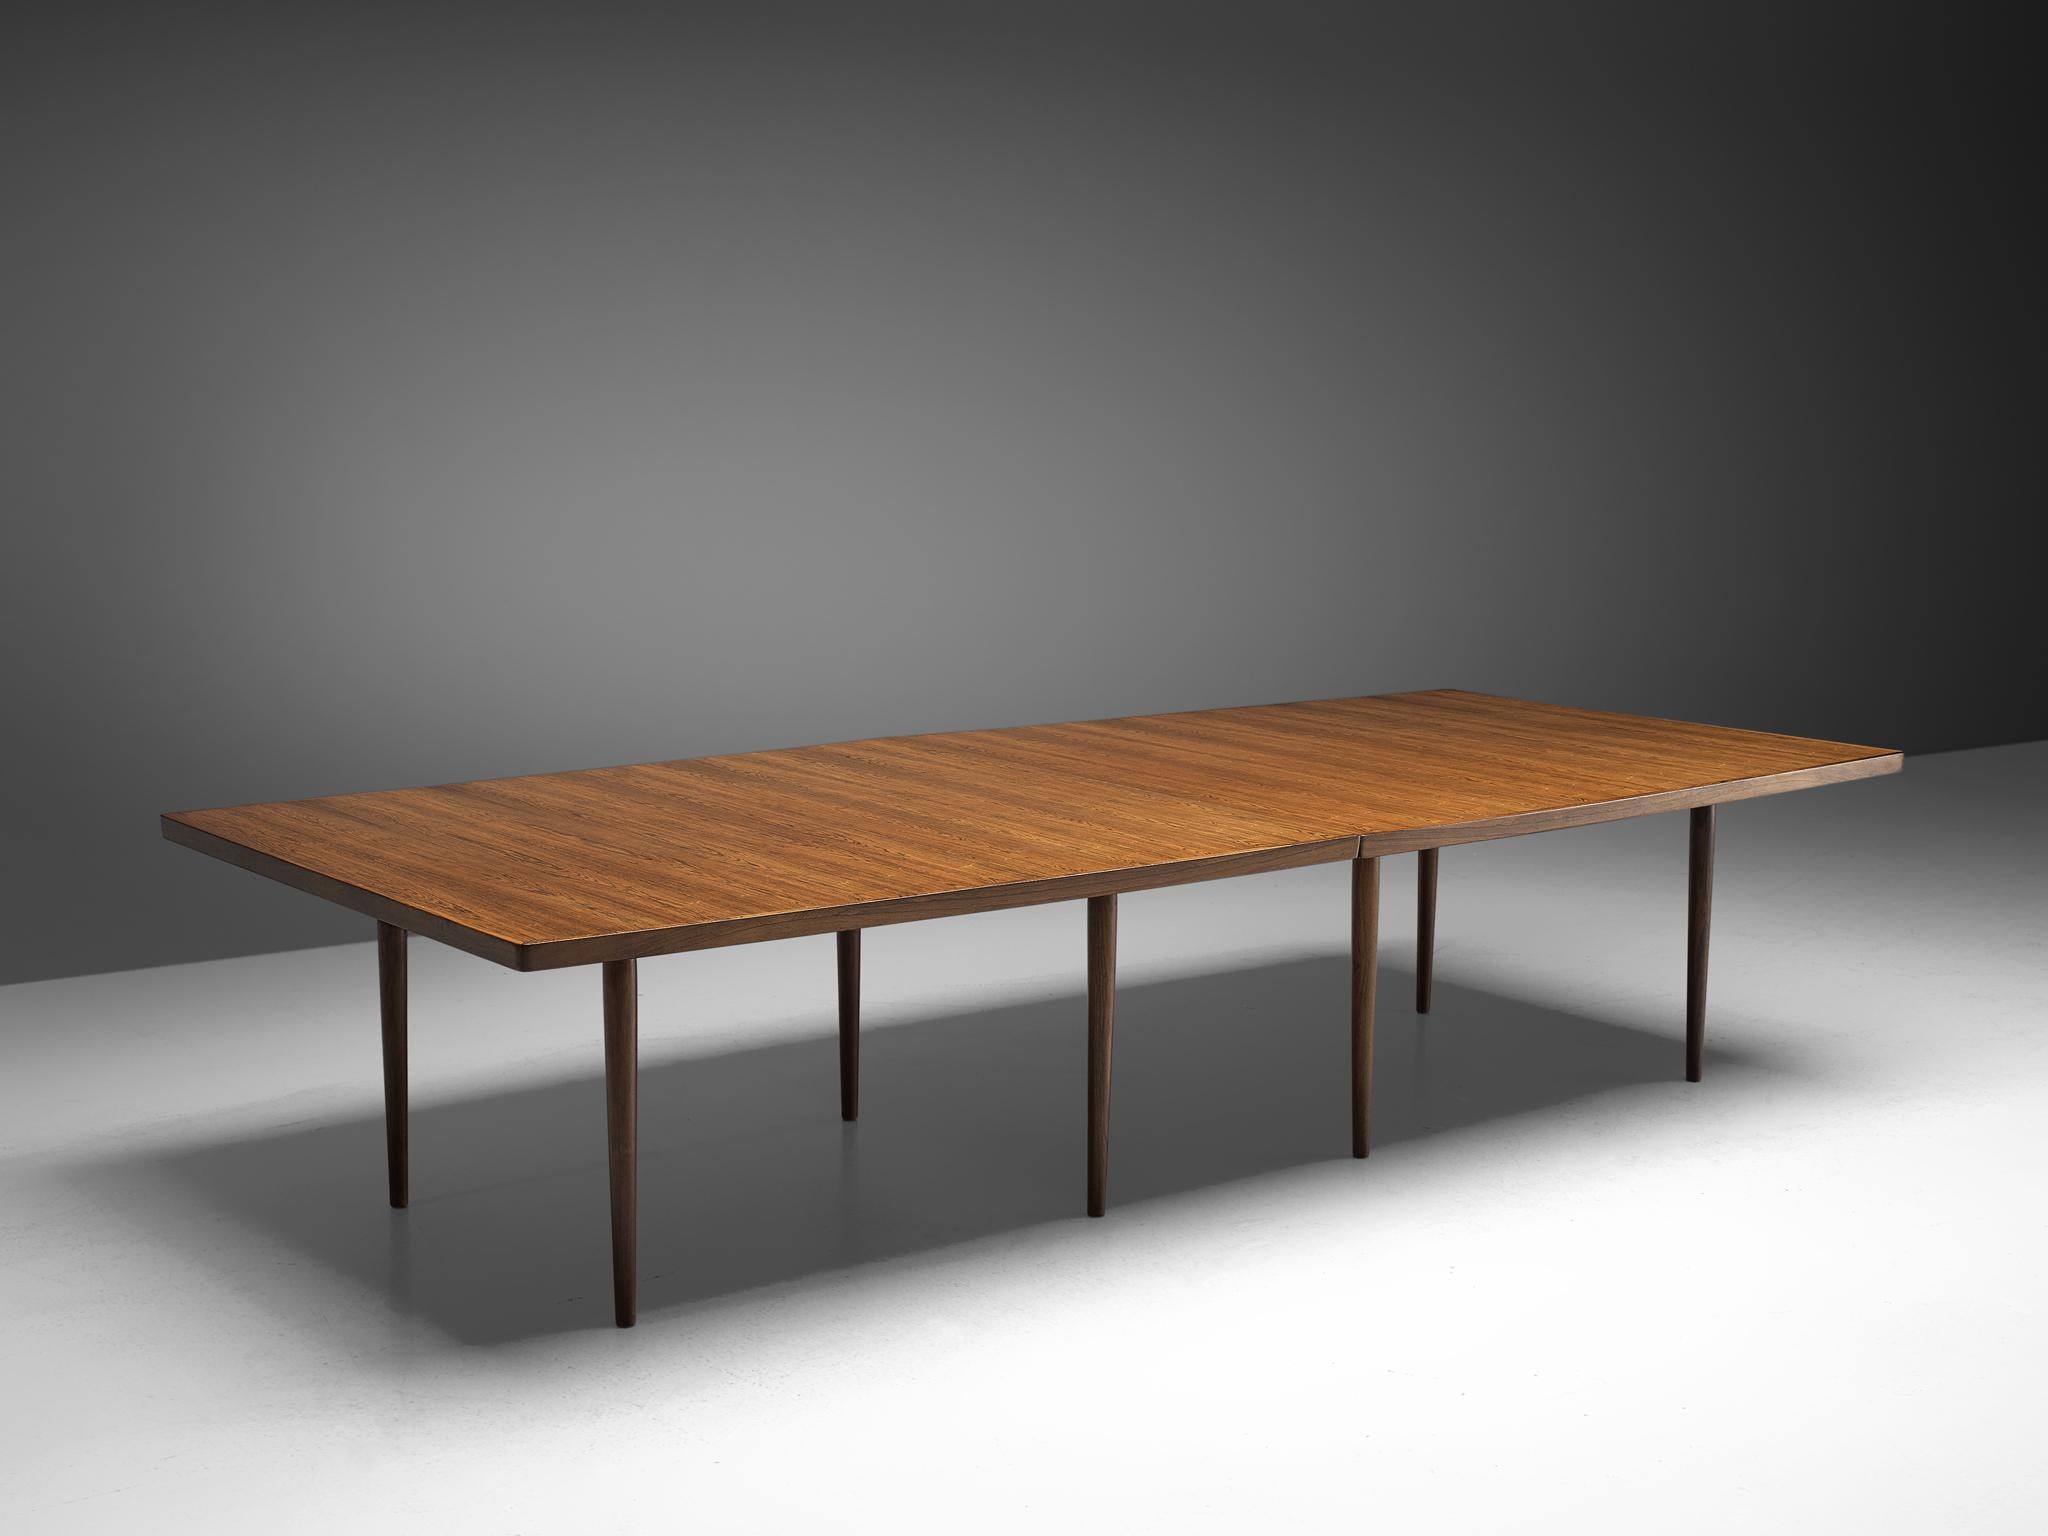 Arne Vodder for Sibast, dining table, Denmark, 1960s

Large conference table by Arne Vodder for Sibast Furniture with a beautiful rosewood grain. The two table tops are held together by eight conical shaped legs in solid rosewood which give this